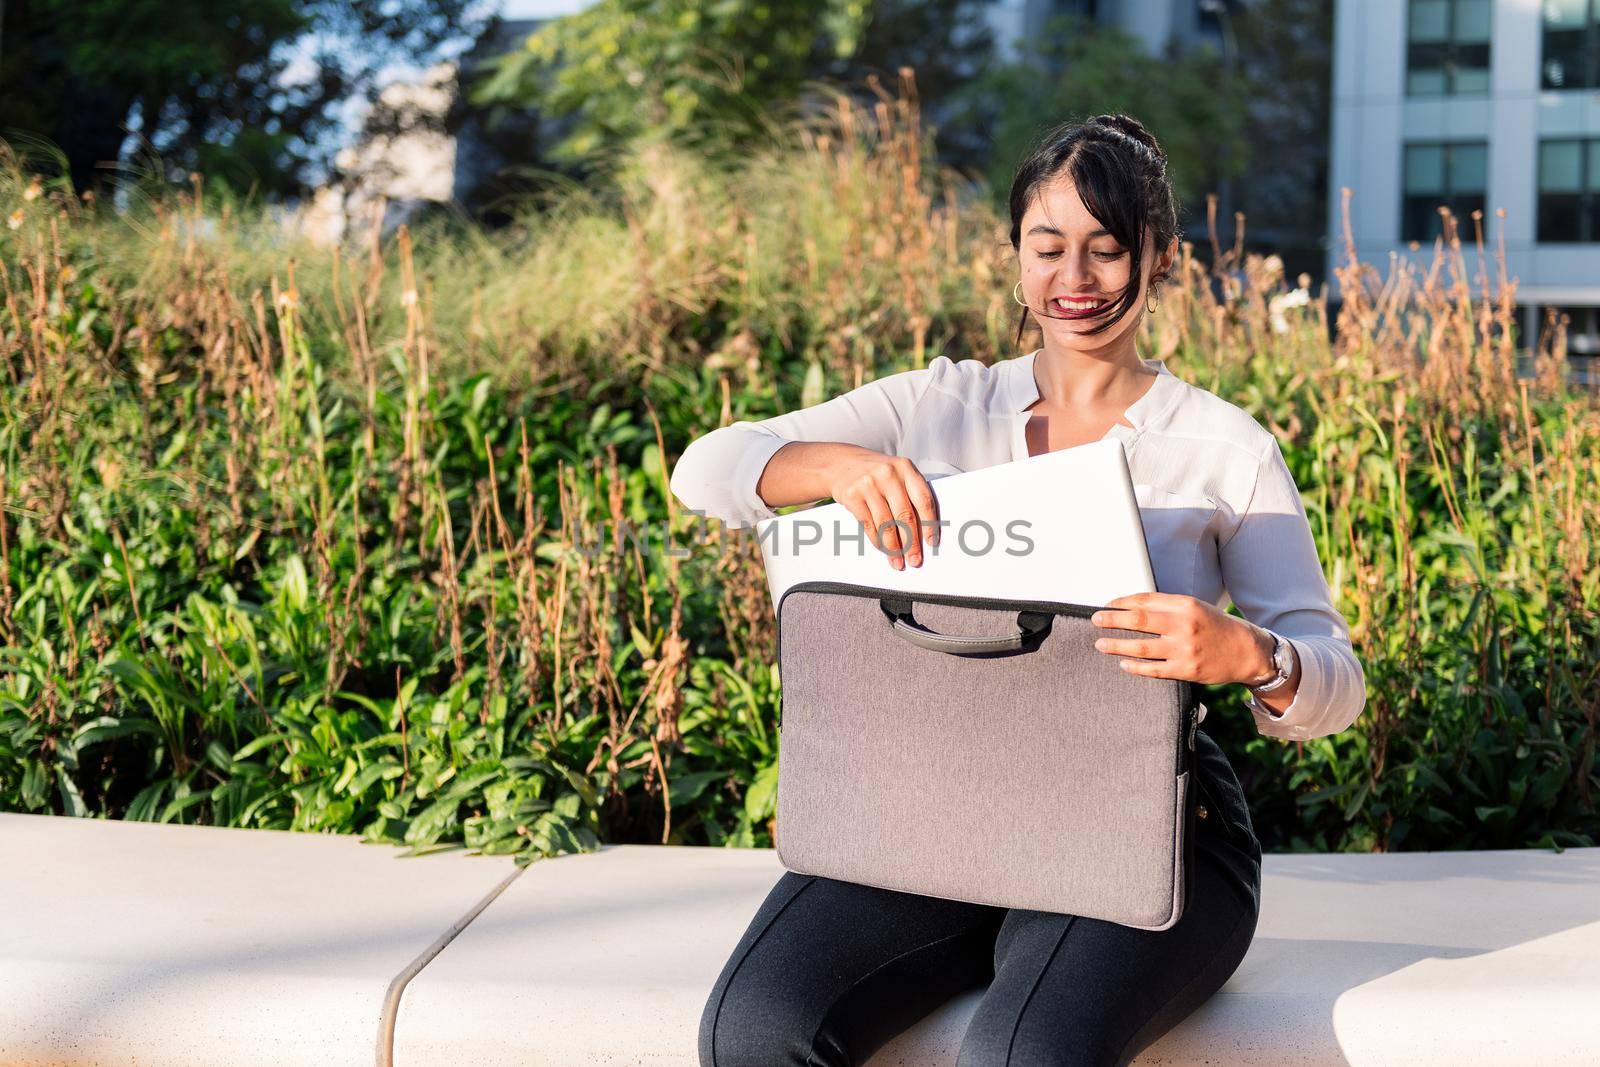 smiling businesswoman taking her laptop computer out of her briefcase sitting in a park, concept of digital entrepreneur and urban lifestyle, copy space for text